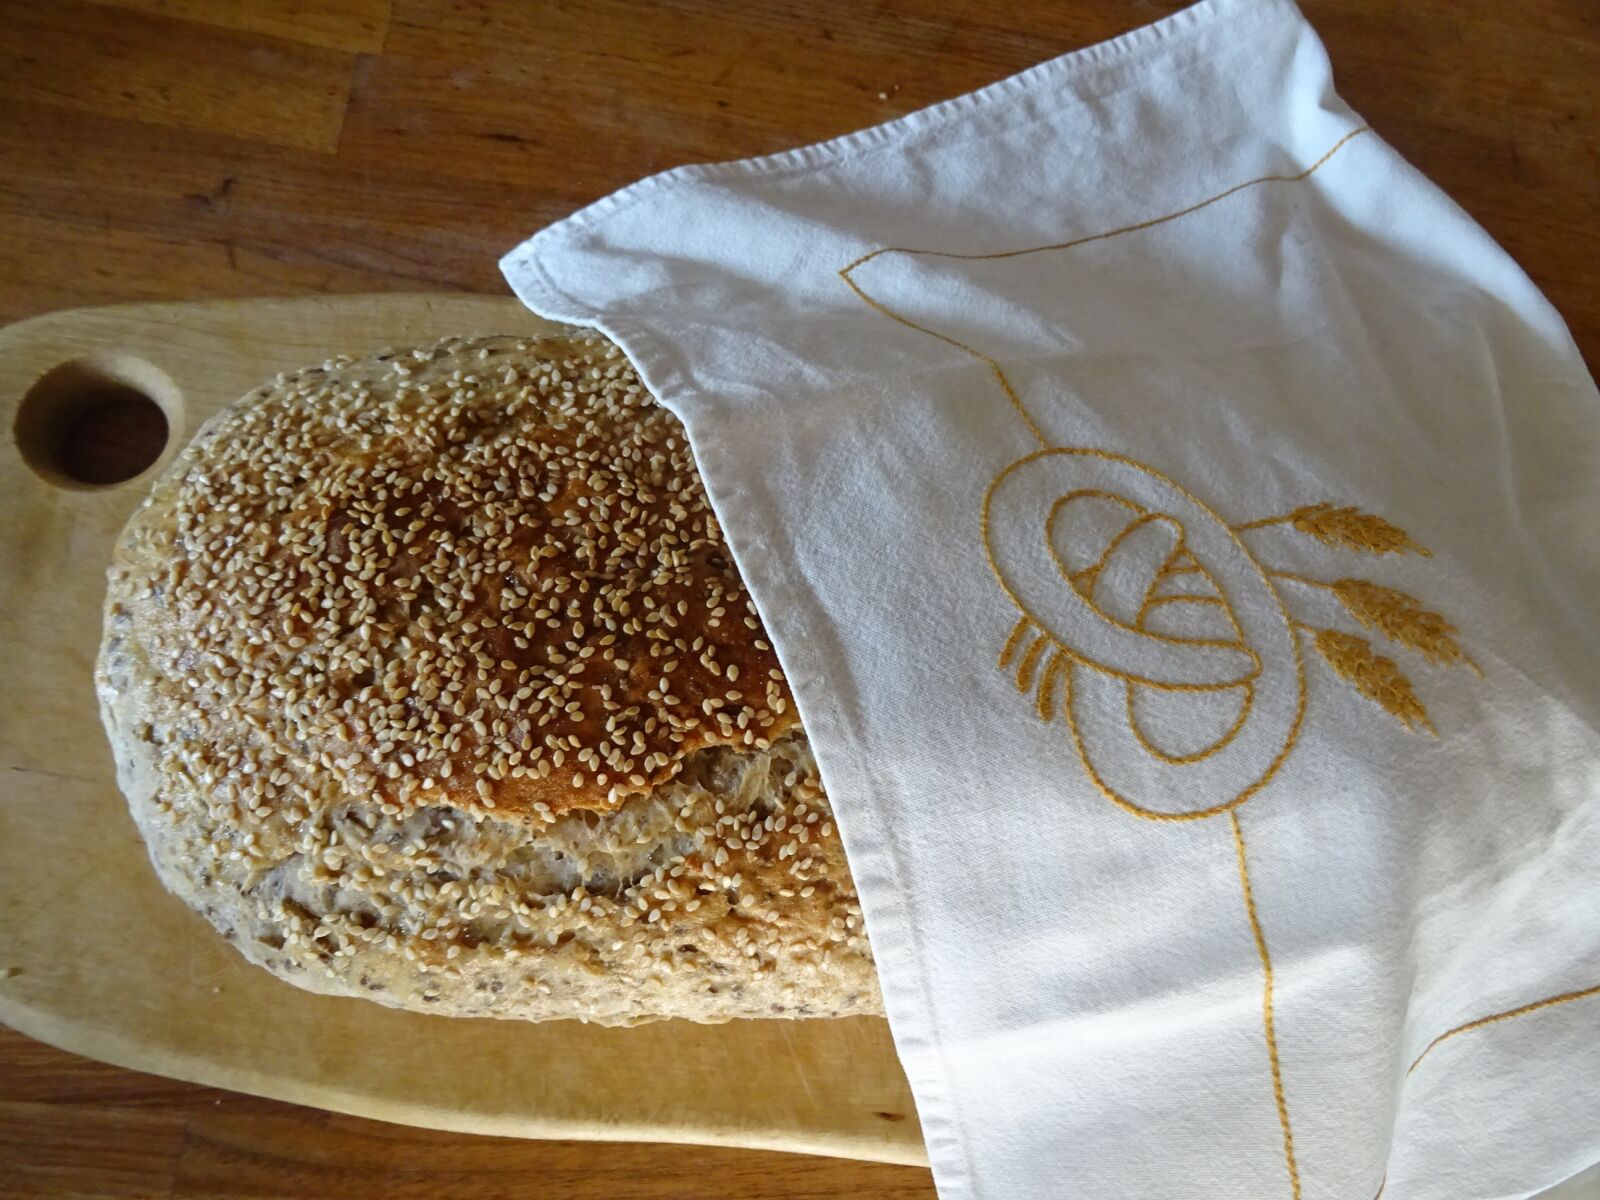 Sony DSC-HX60V sample photo. Bread, covered with a photography